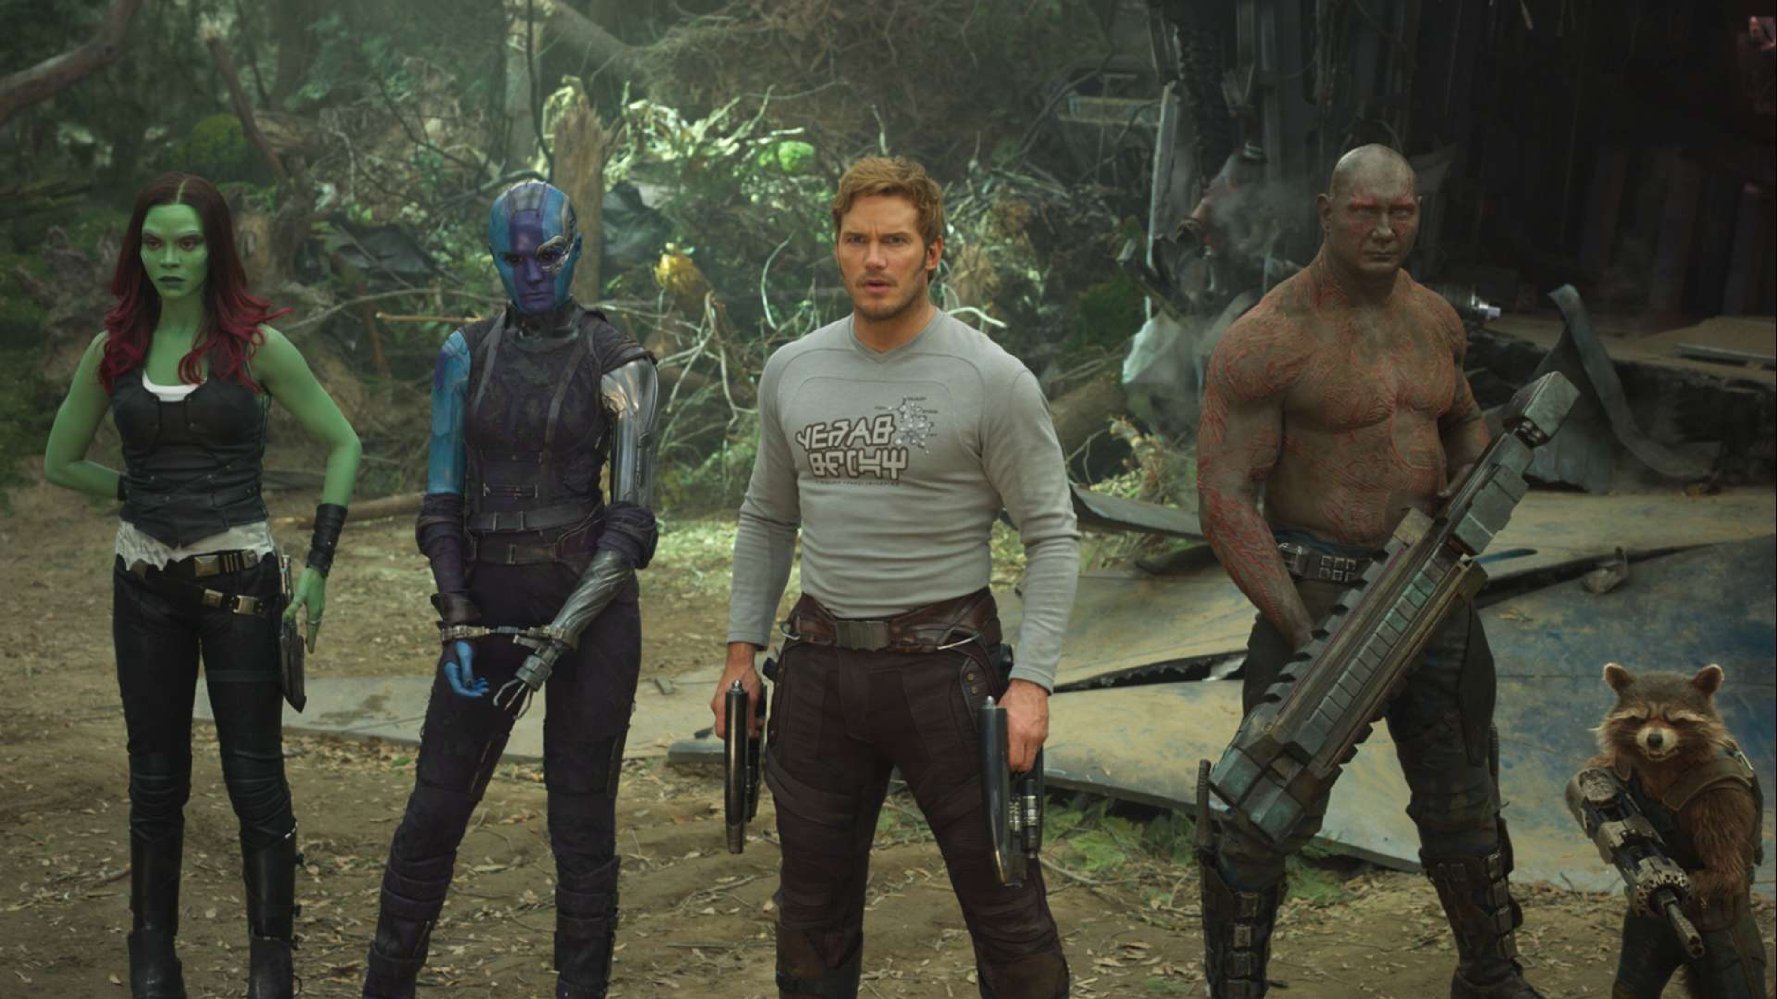 GUARDIANS OF THE GALAXY VOL. 2 Doesn’t Soar, But Is Still a Fun Journey